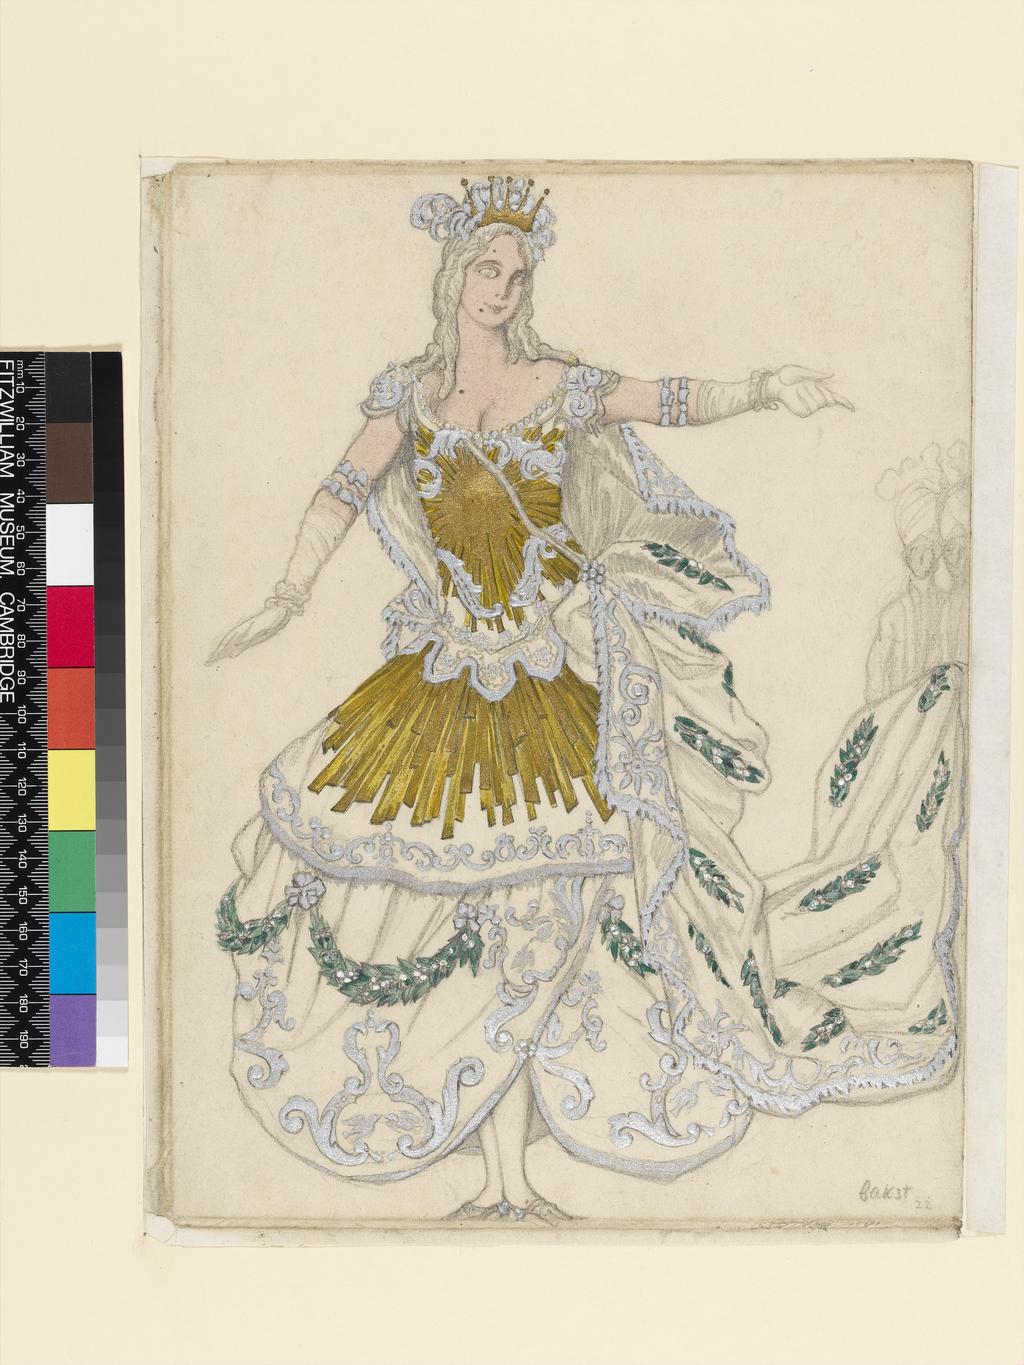 An image of Title/s: "La Princesse Aurore" Maker/s: Bakst, Leon (draughtsman) [ULAN info: 1866-1924] Technique Description: graphite, watercolour, with gold and silver paint, heightened with white, on paperDimensions: height: 300 mm, width: 227 mm Date: 1922 